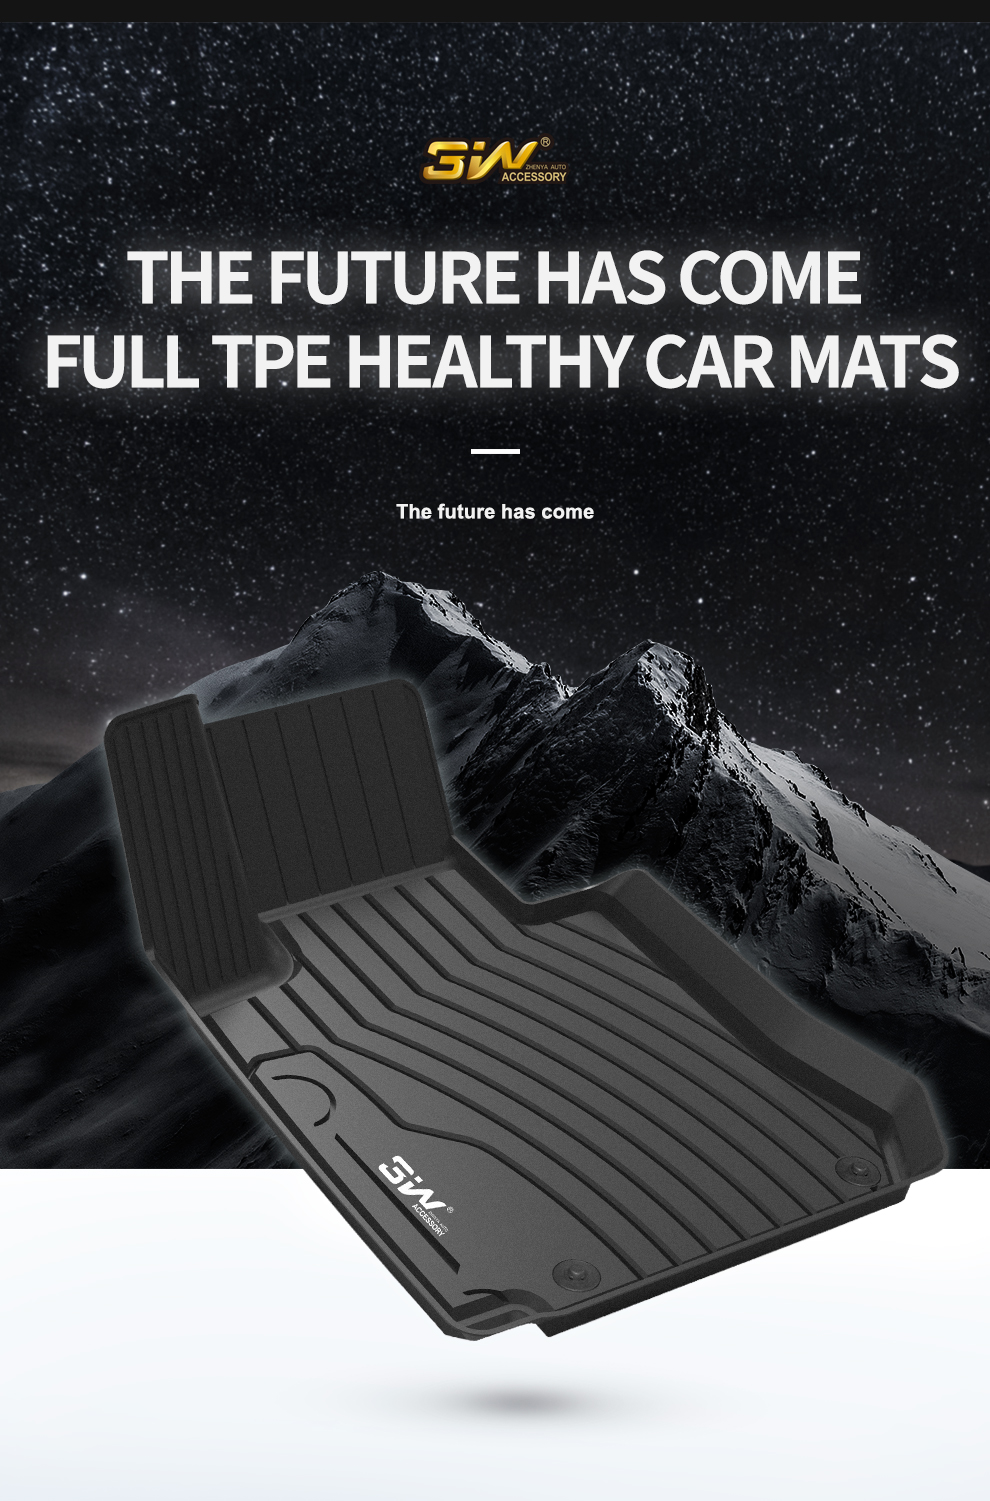 What are the advantages of TPE car mats material?